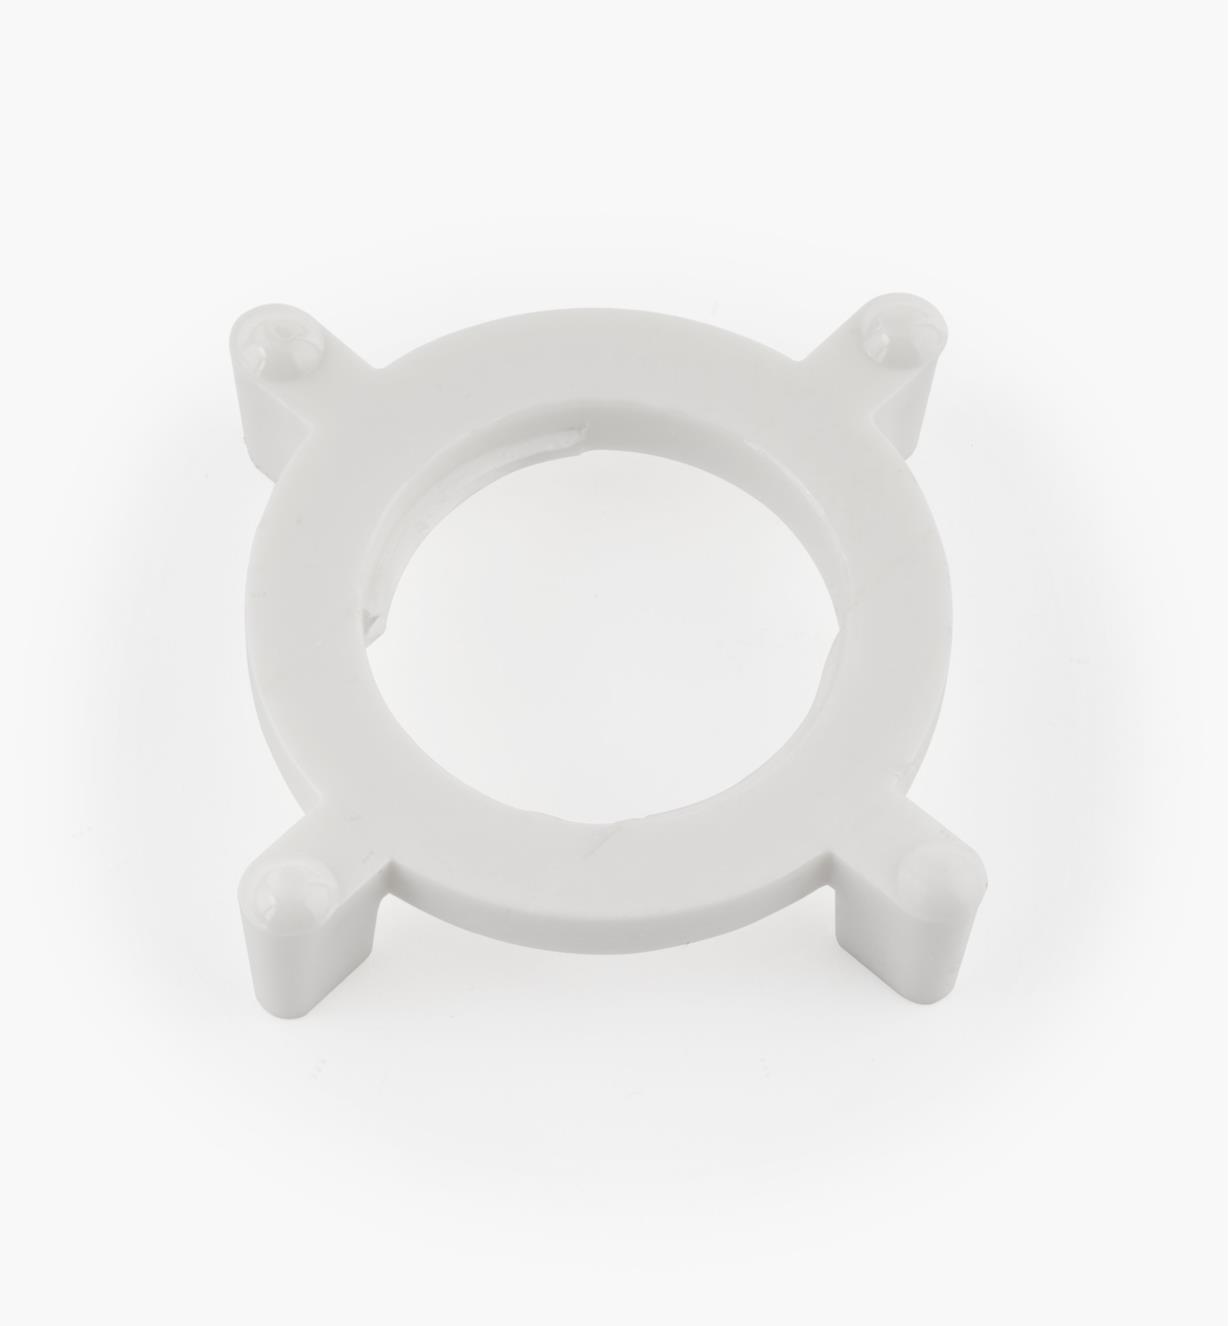 00U4354 - Optional Ring Nut for Warm or Natural White Light, each